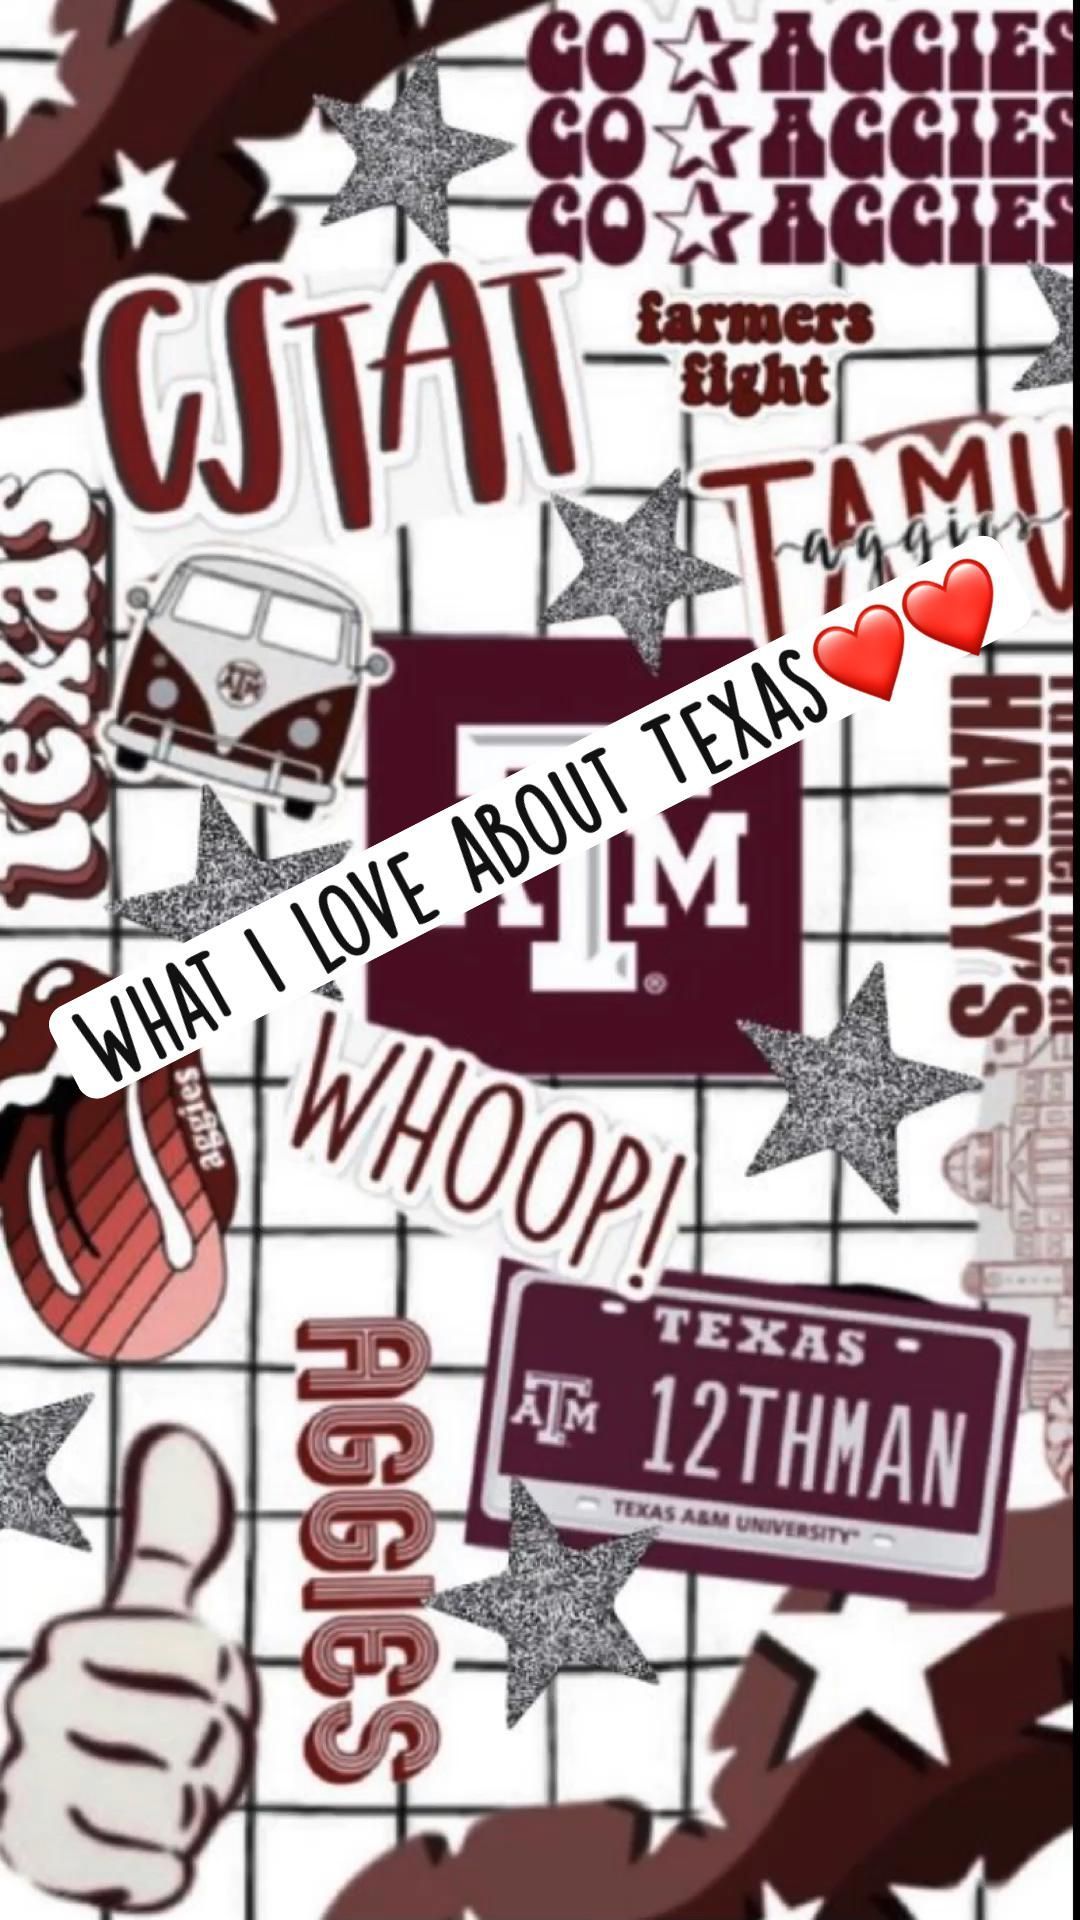 What I love about Texas❤️❤️. Cheers aesthetic wallpaper, Texas a&m, Aggies